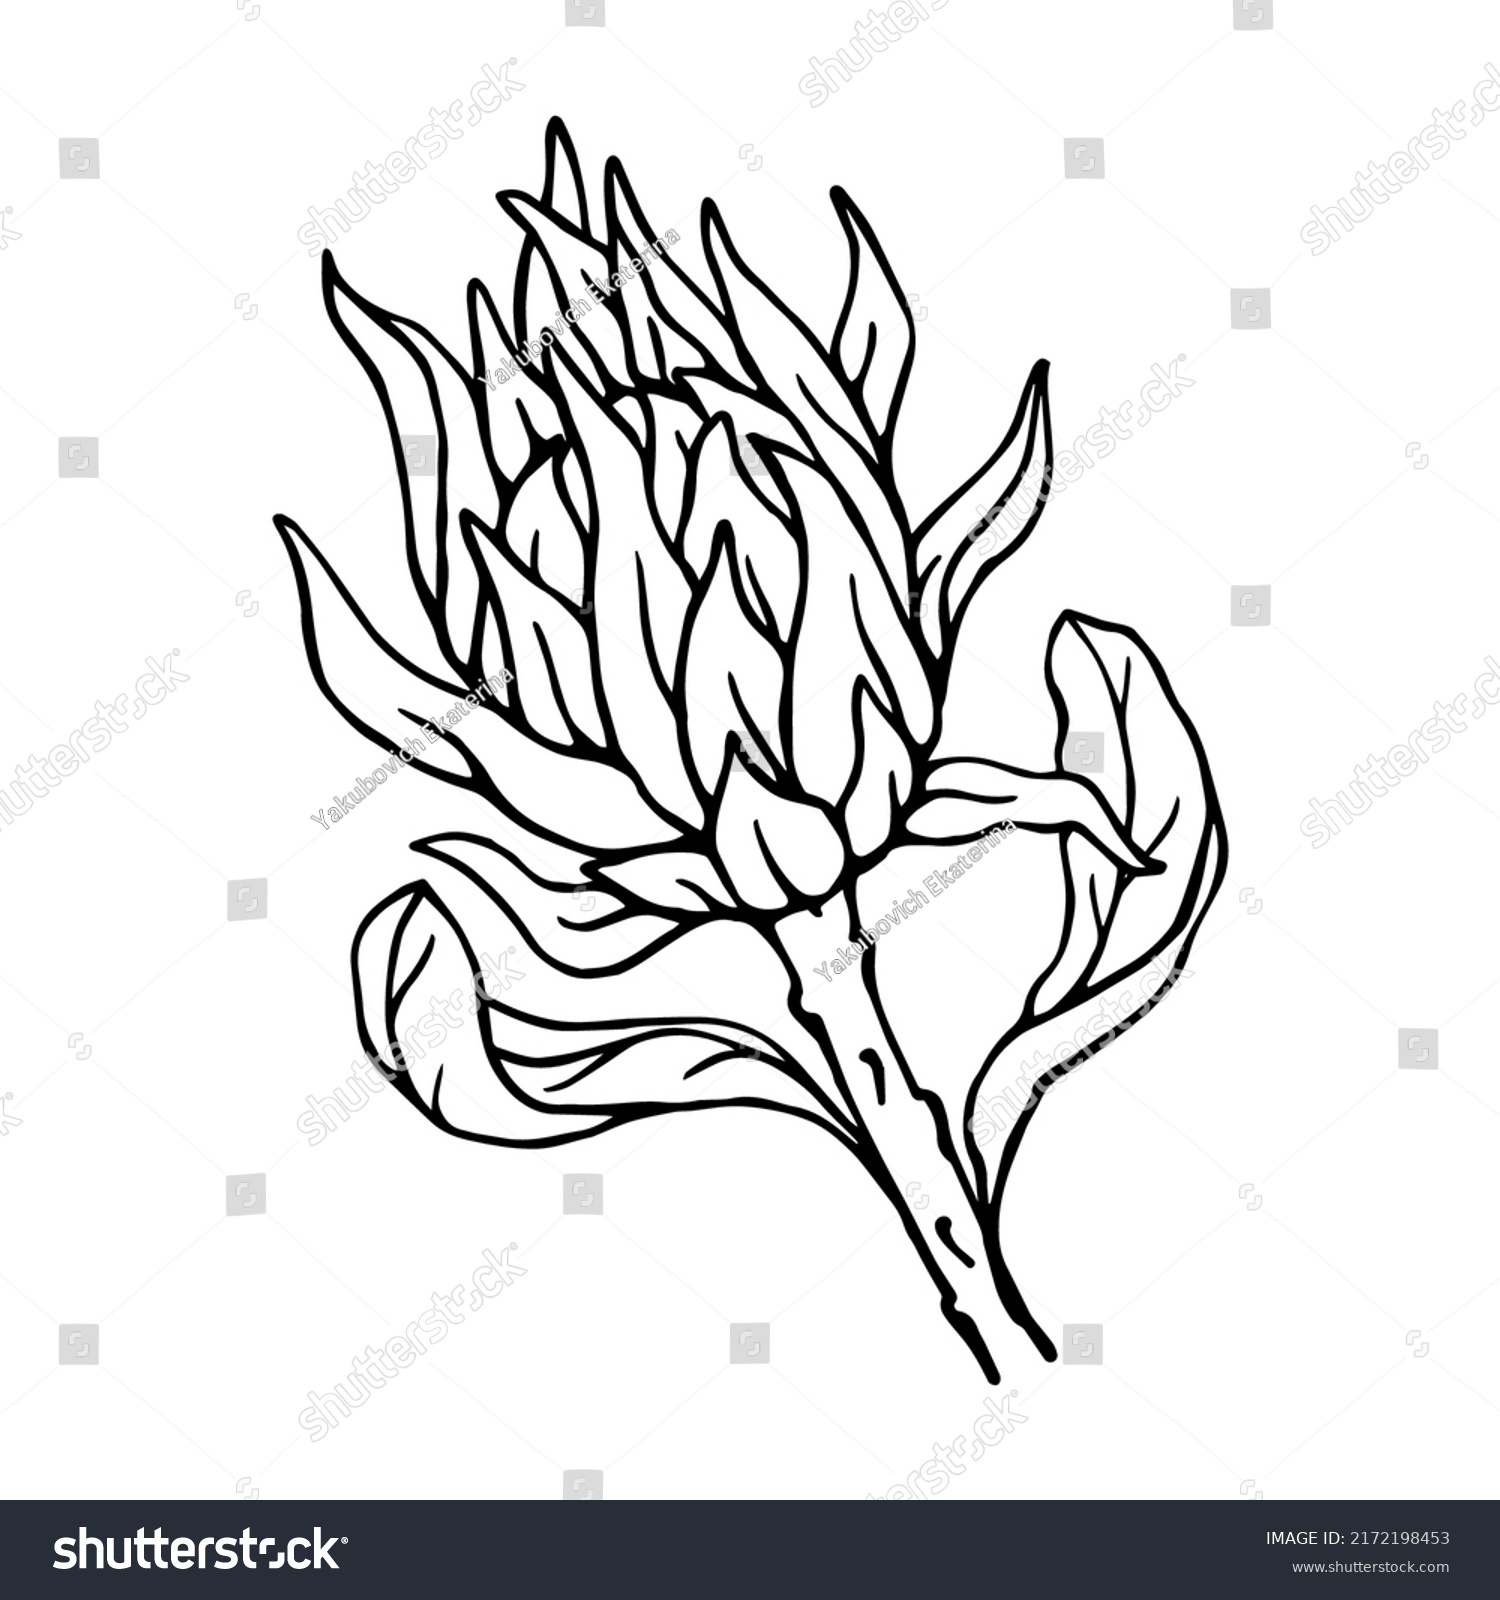 Linear Sketch Protea Flower Vector Graphics Stock Vector (Royalty Free ...